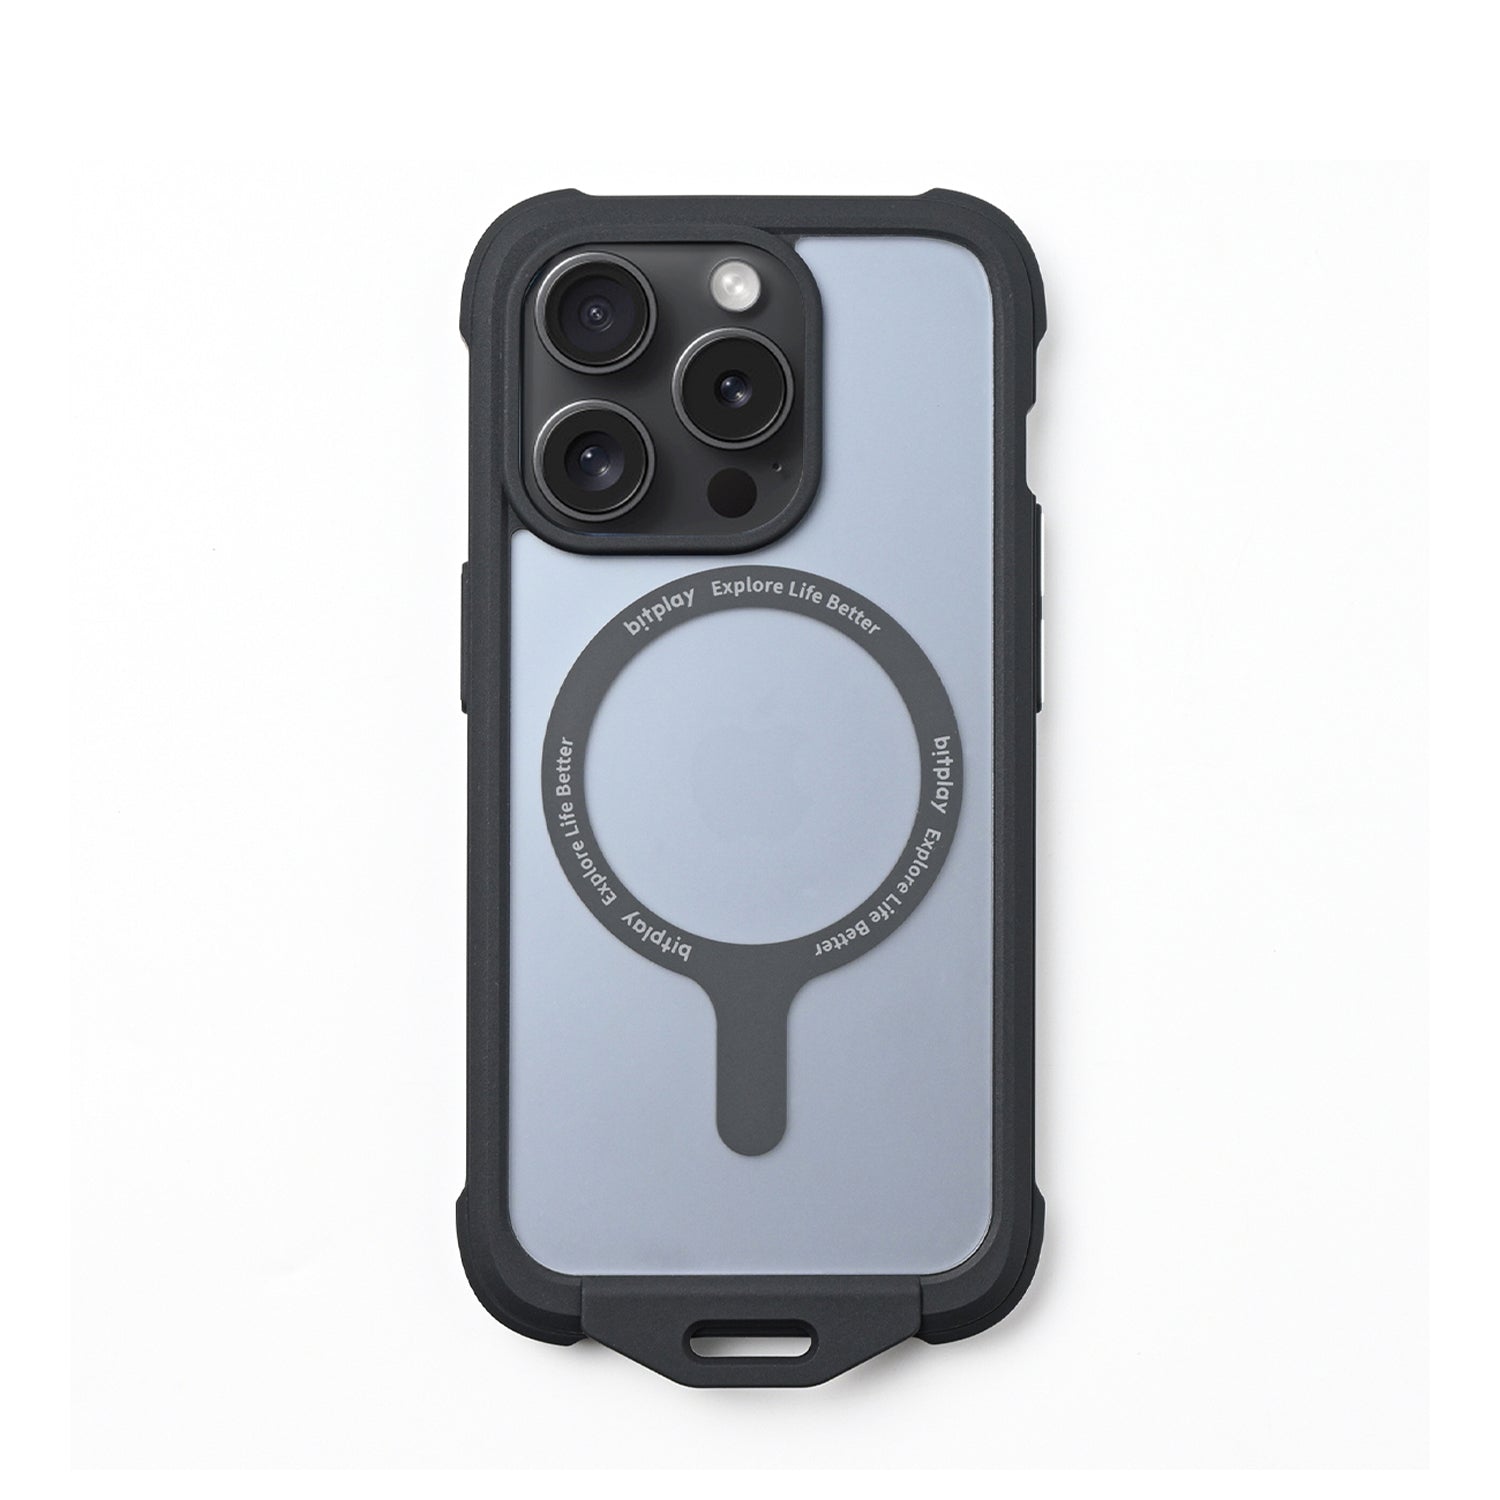 Bitplay Wander Case with MagSafe Compatible for iPhone 15 Series